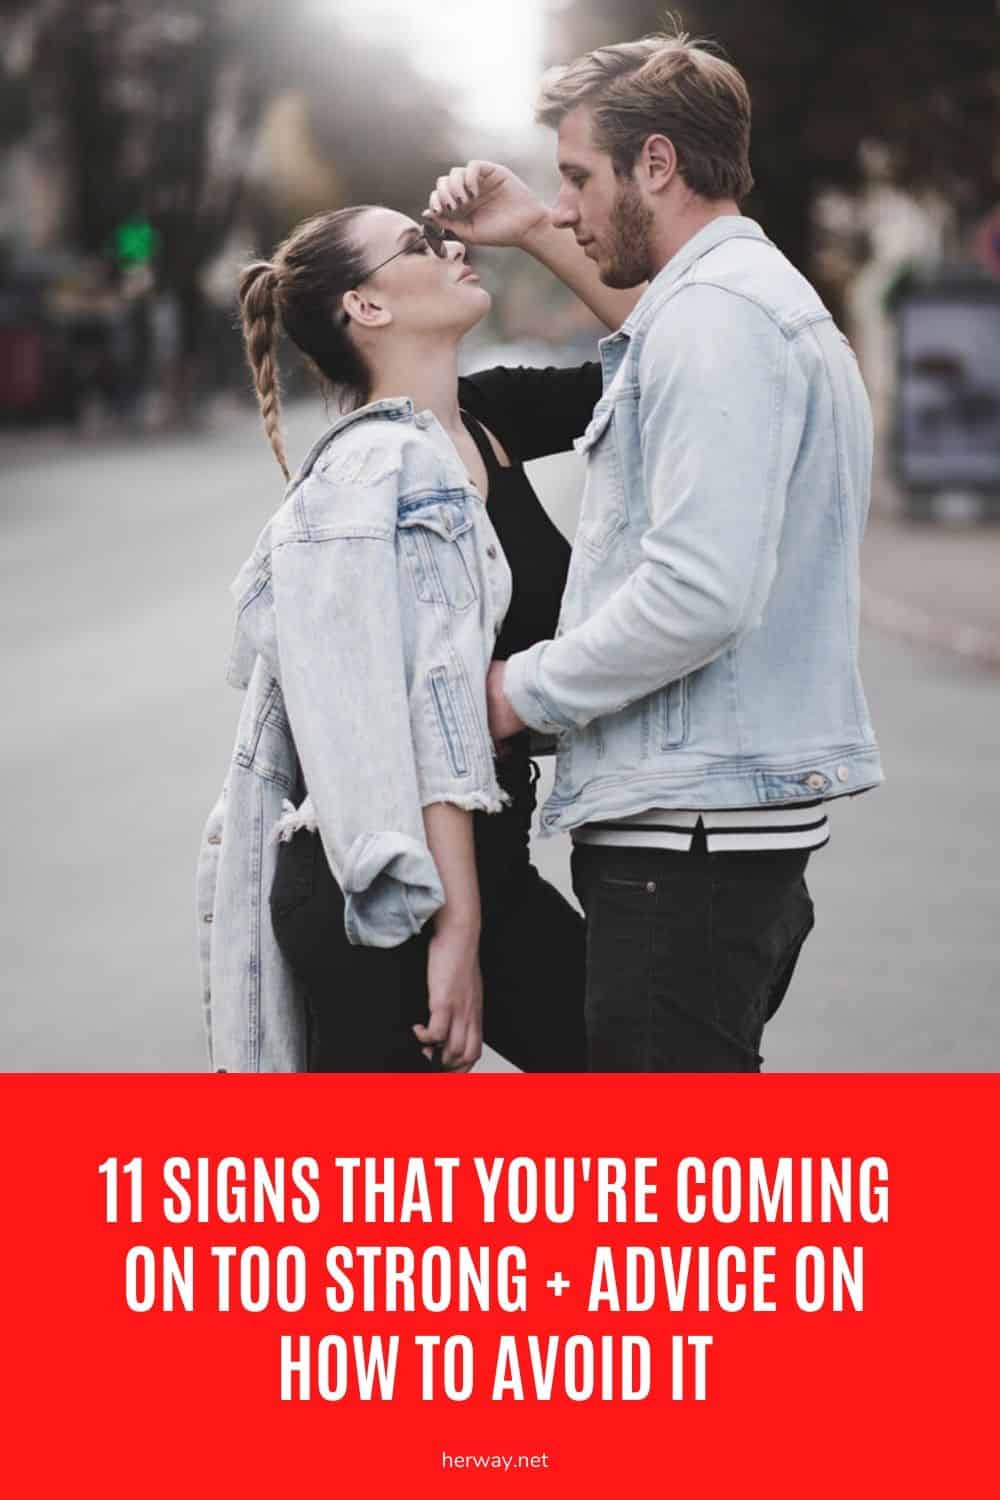 11 Signs That You're Coming On Too Strong + Advice On How To Avoid It